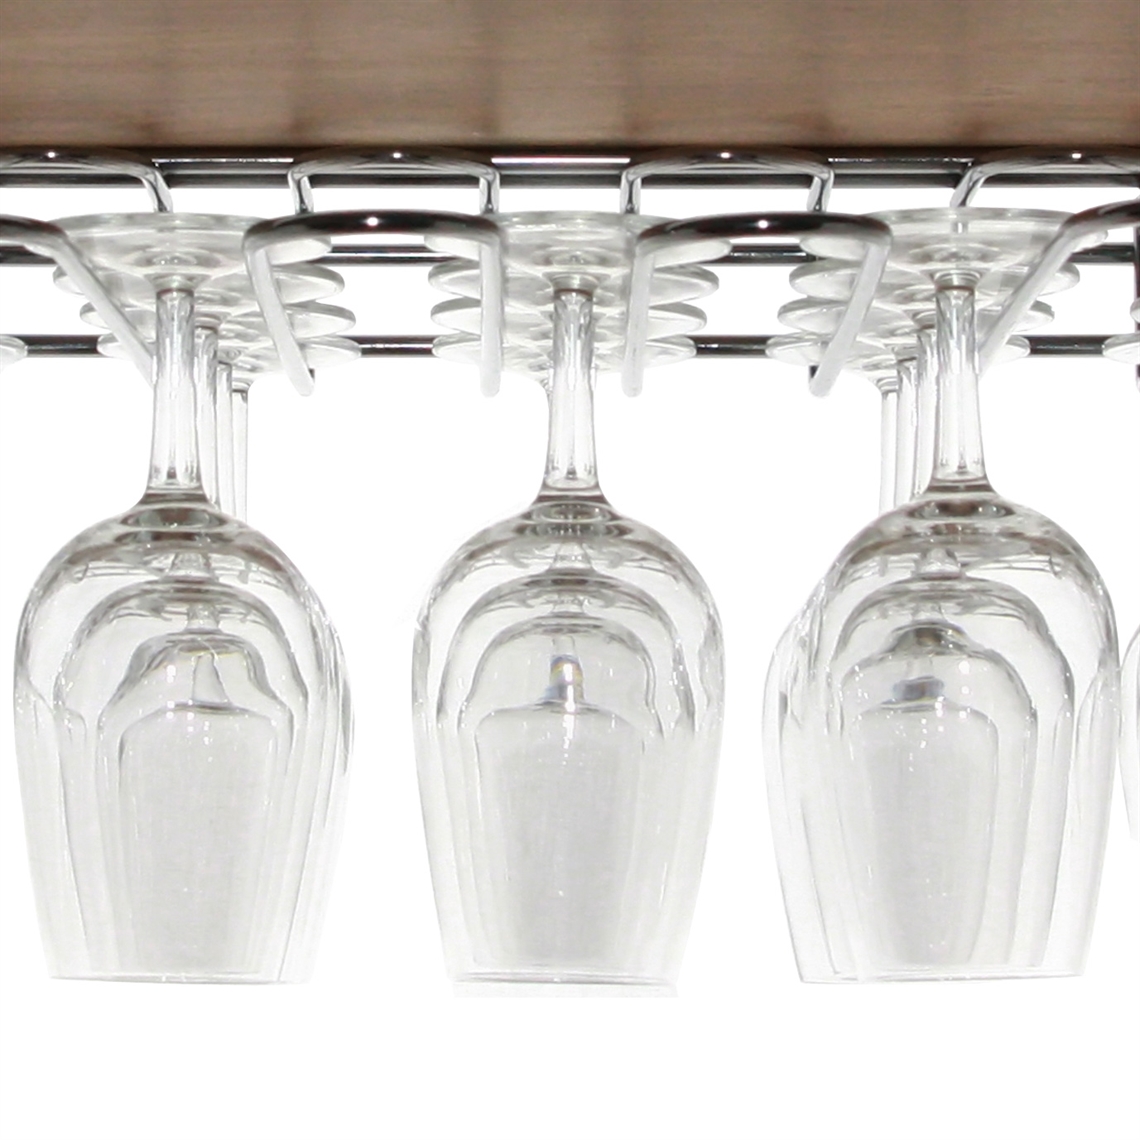 View more fries rack system from our Wine Glass Hanging Racks range